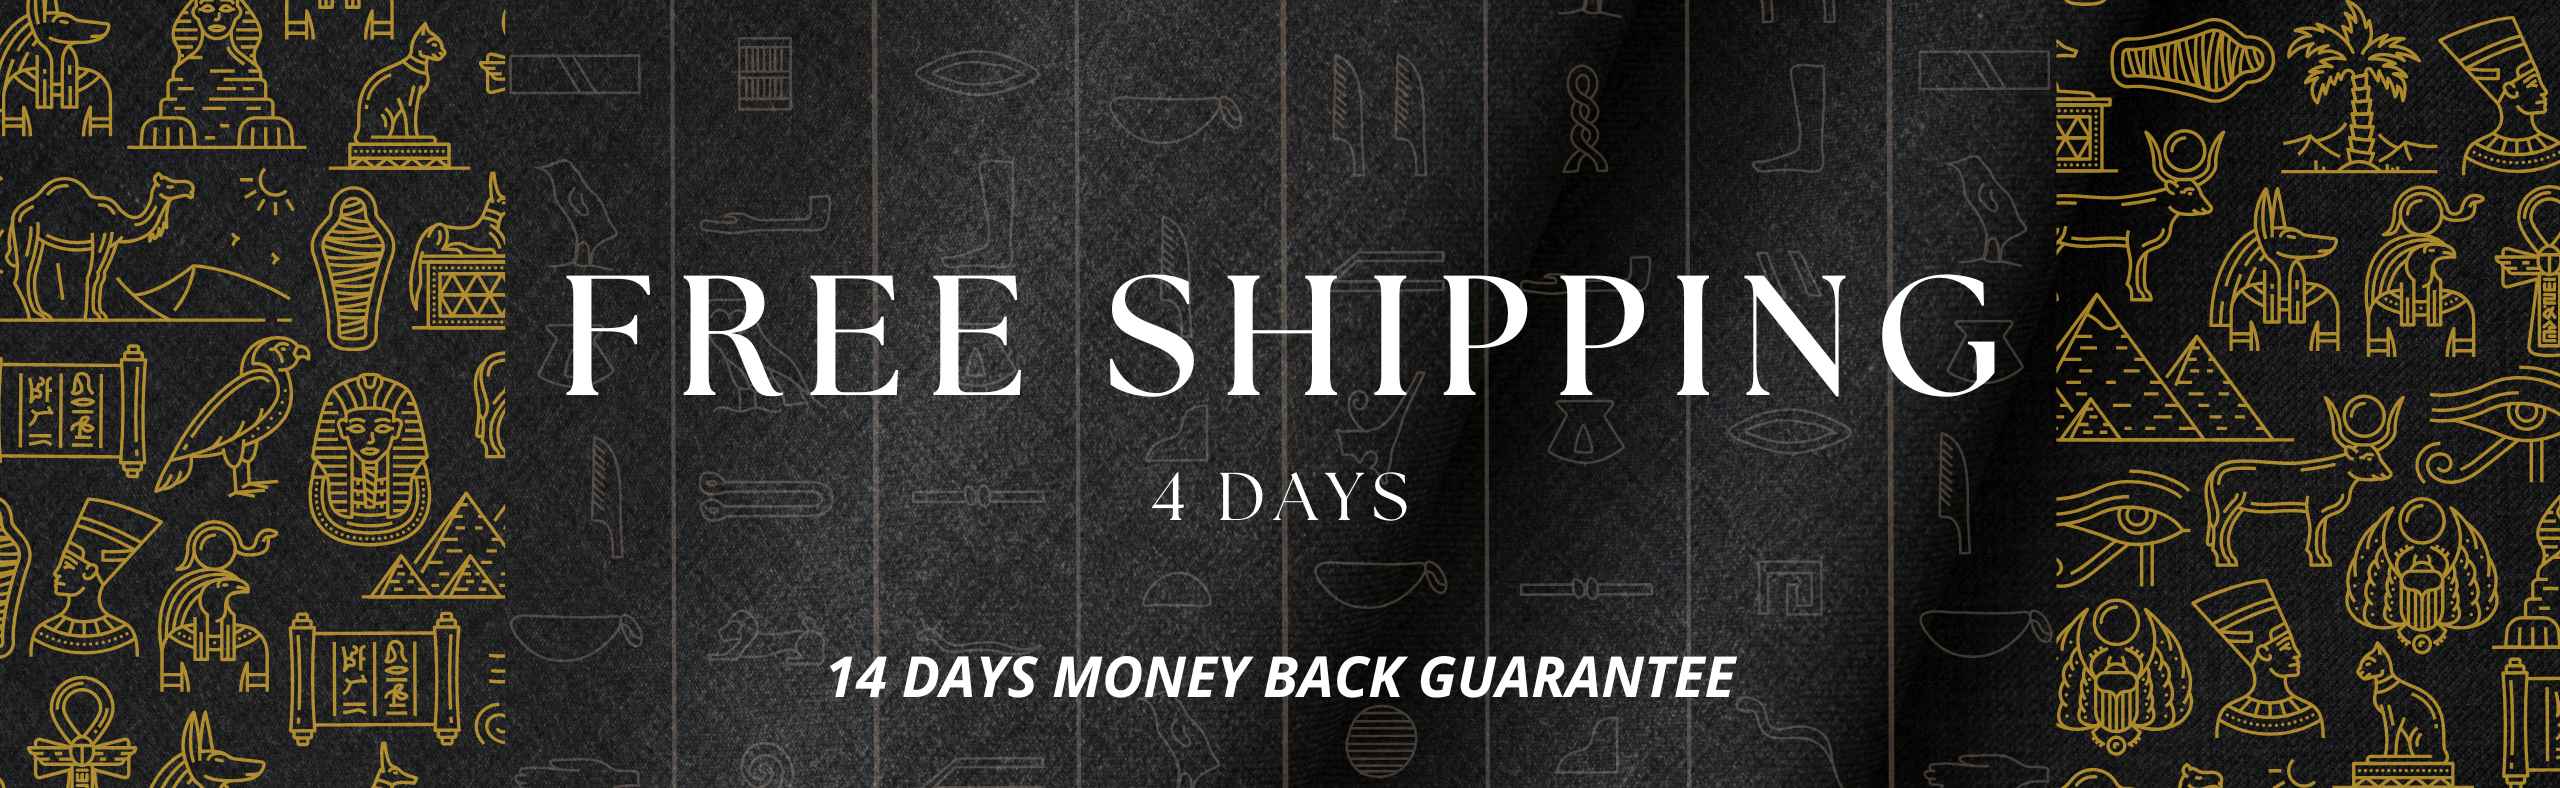 free_shipping_money_back_banner